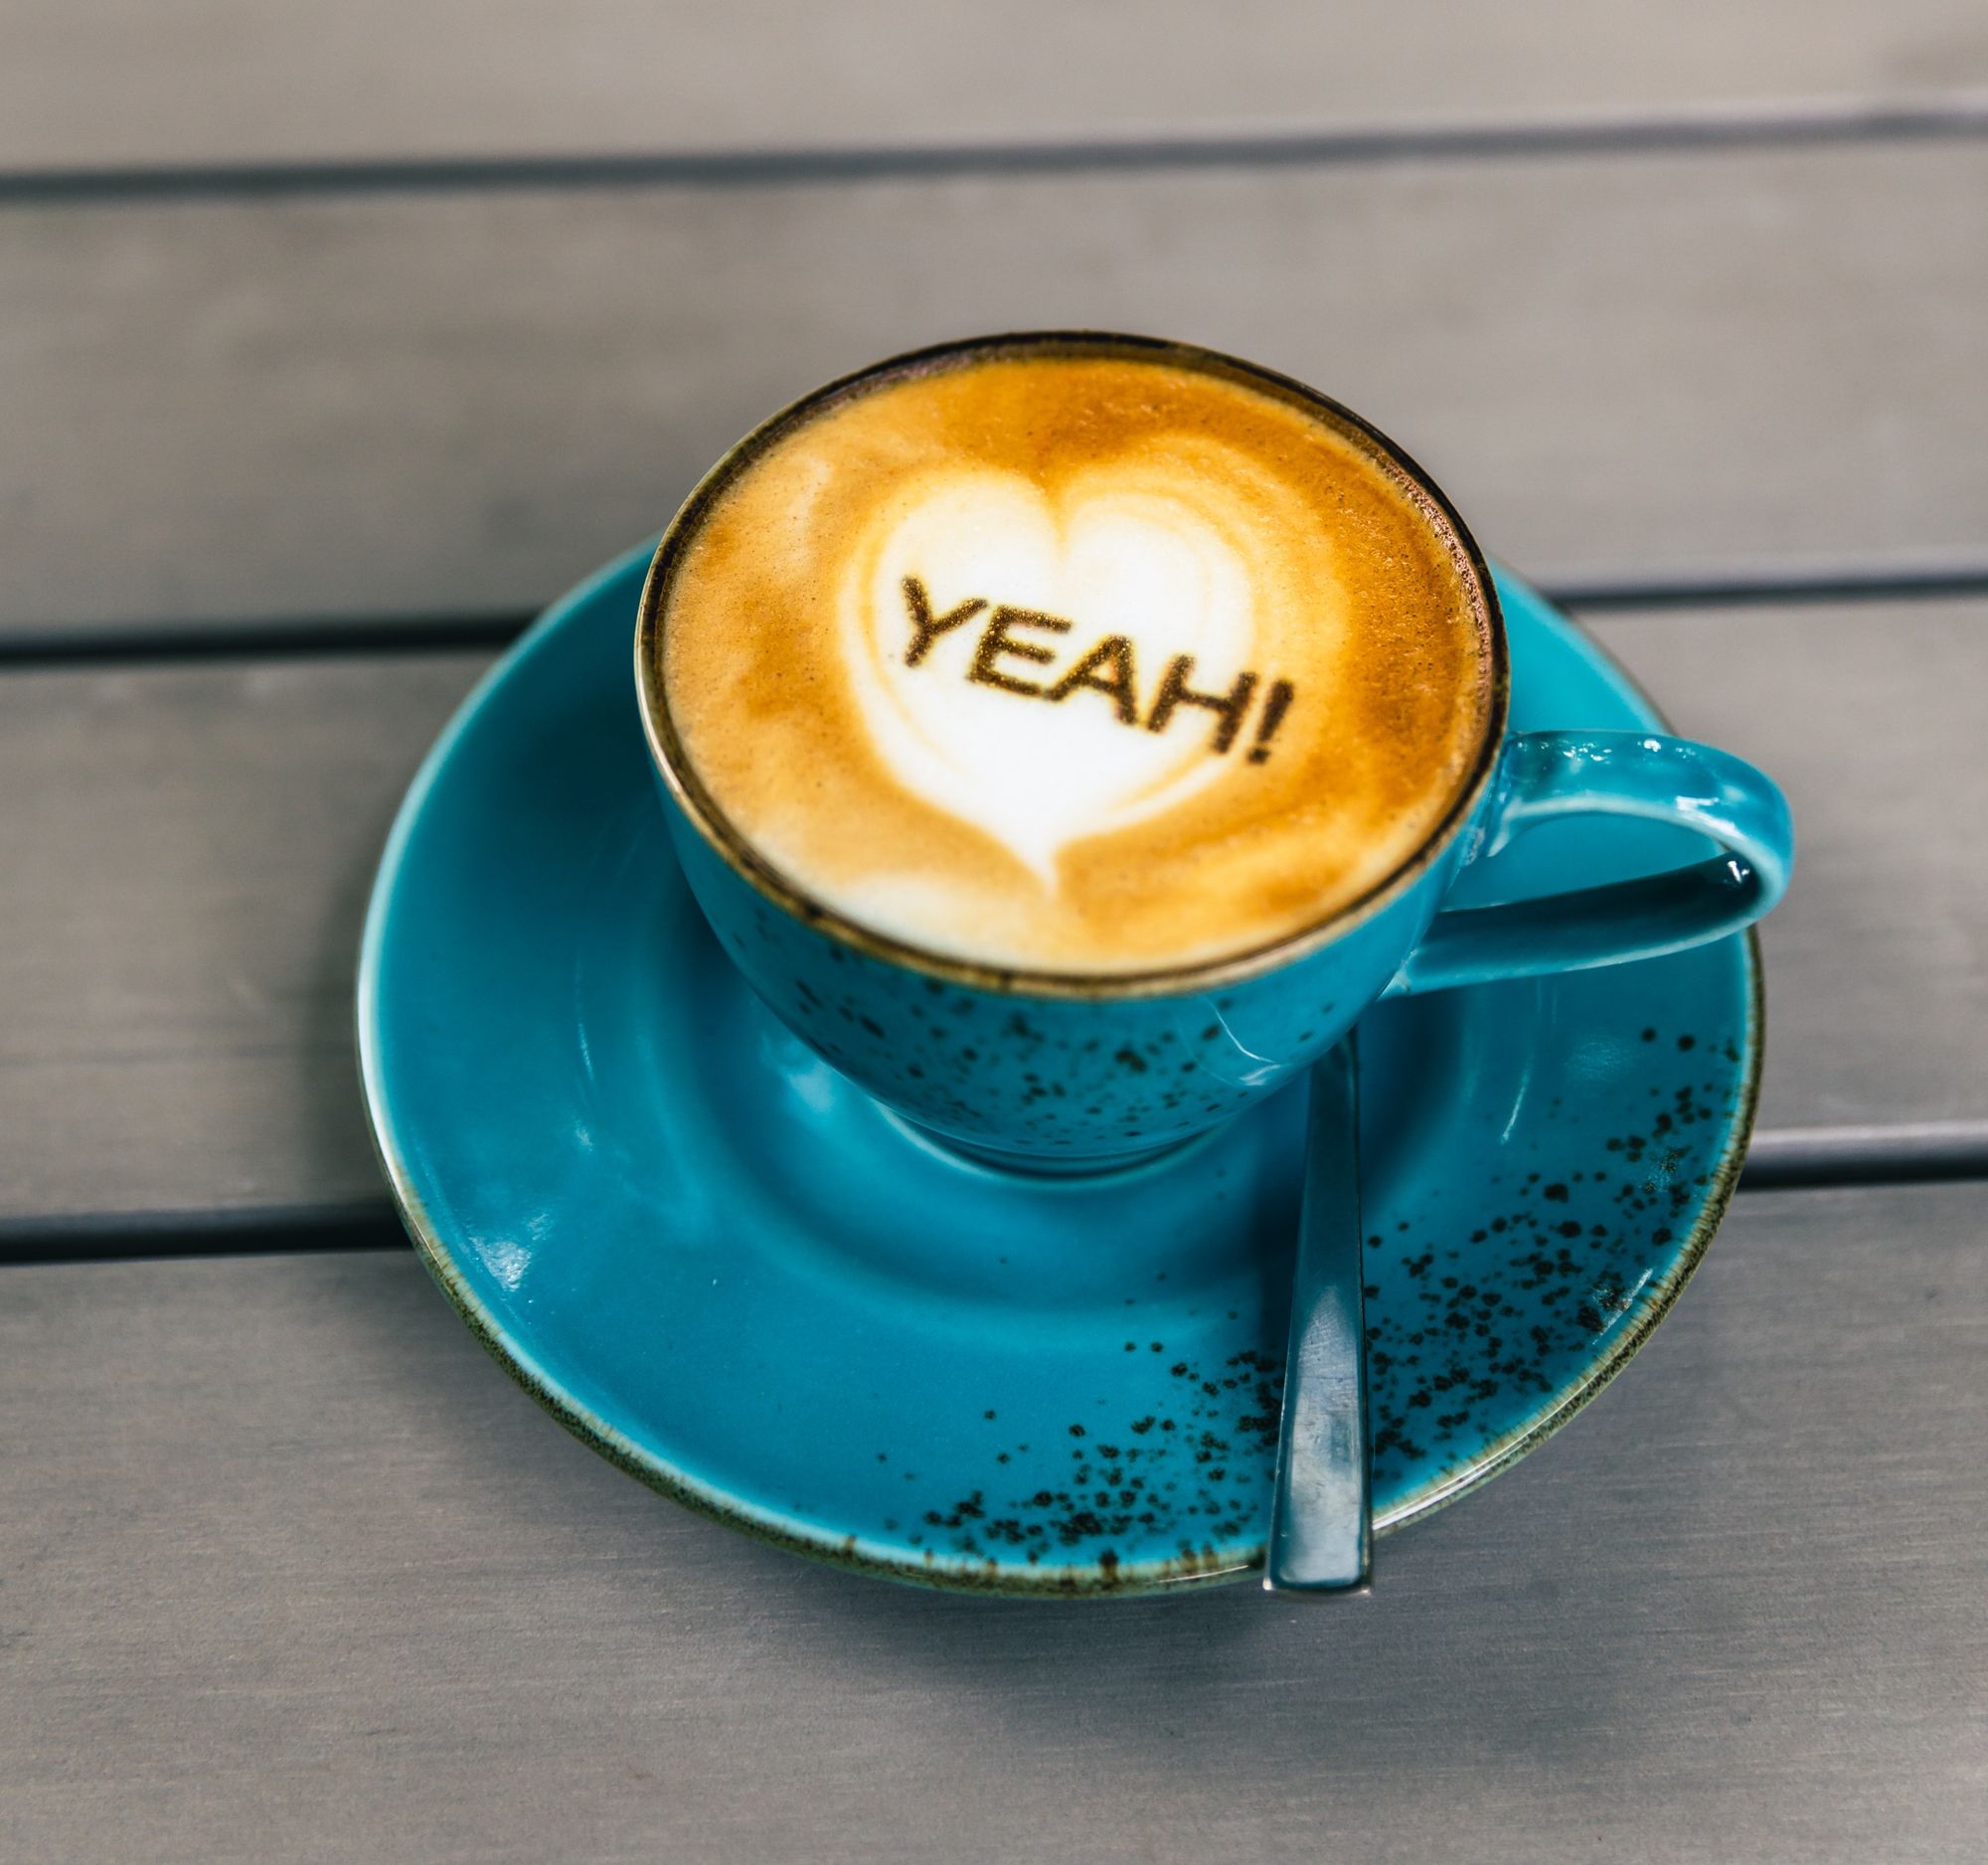 Coffee cup showing 'yeah' as a caption in the foam